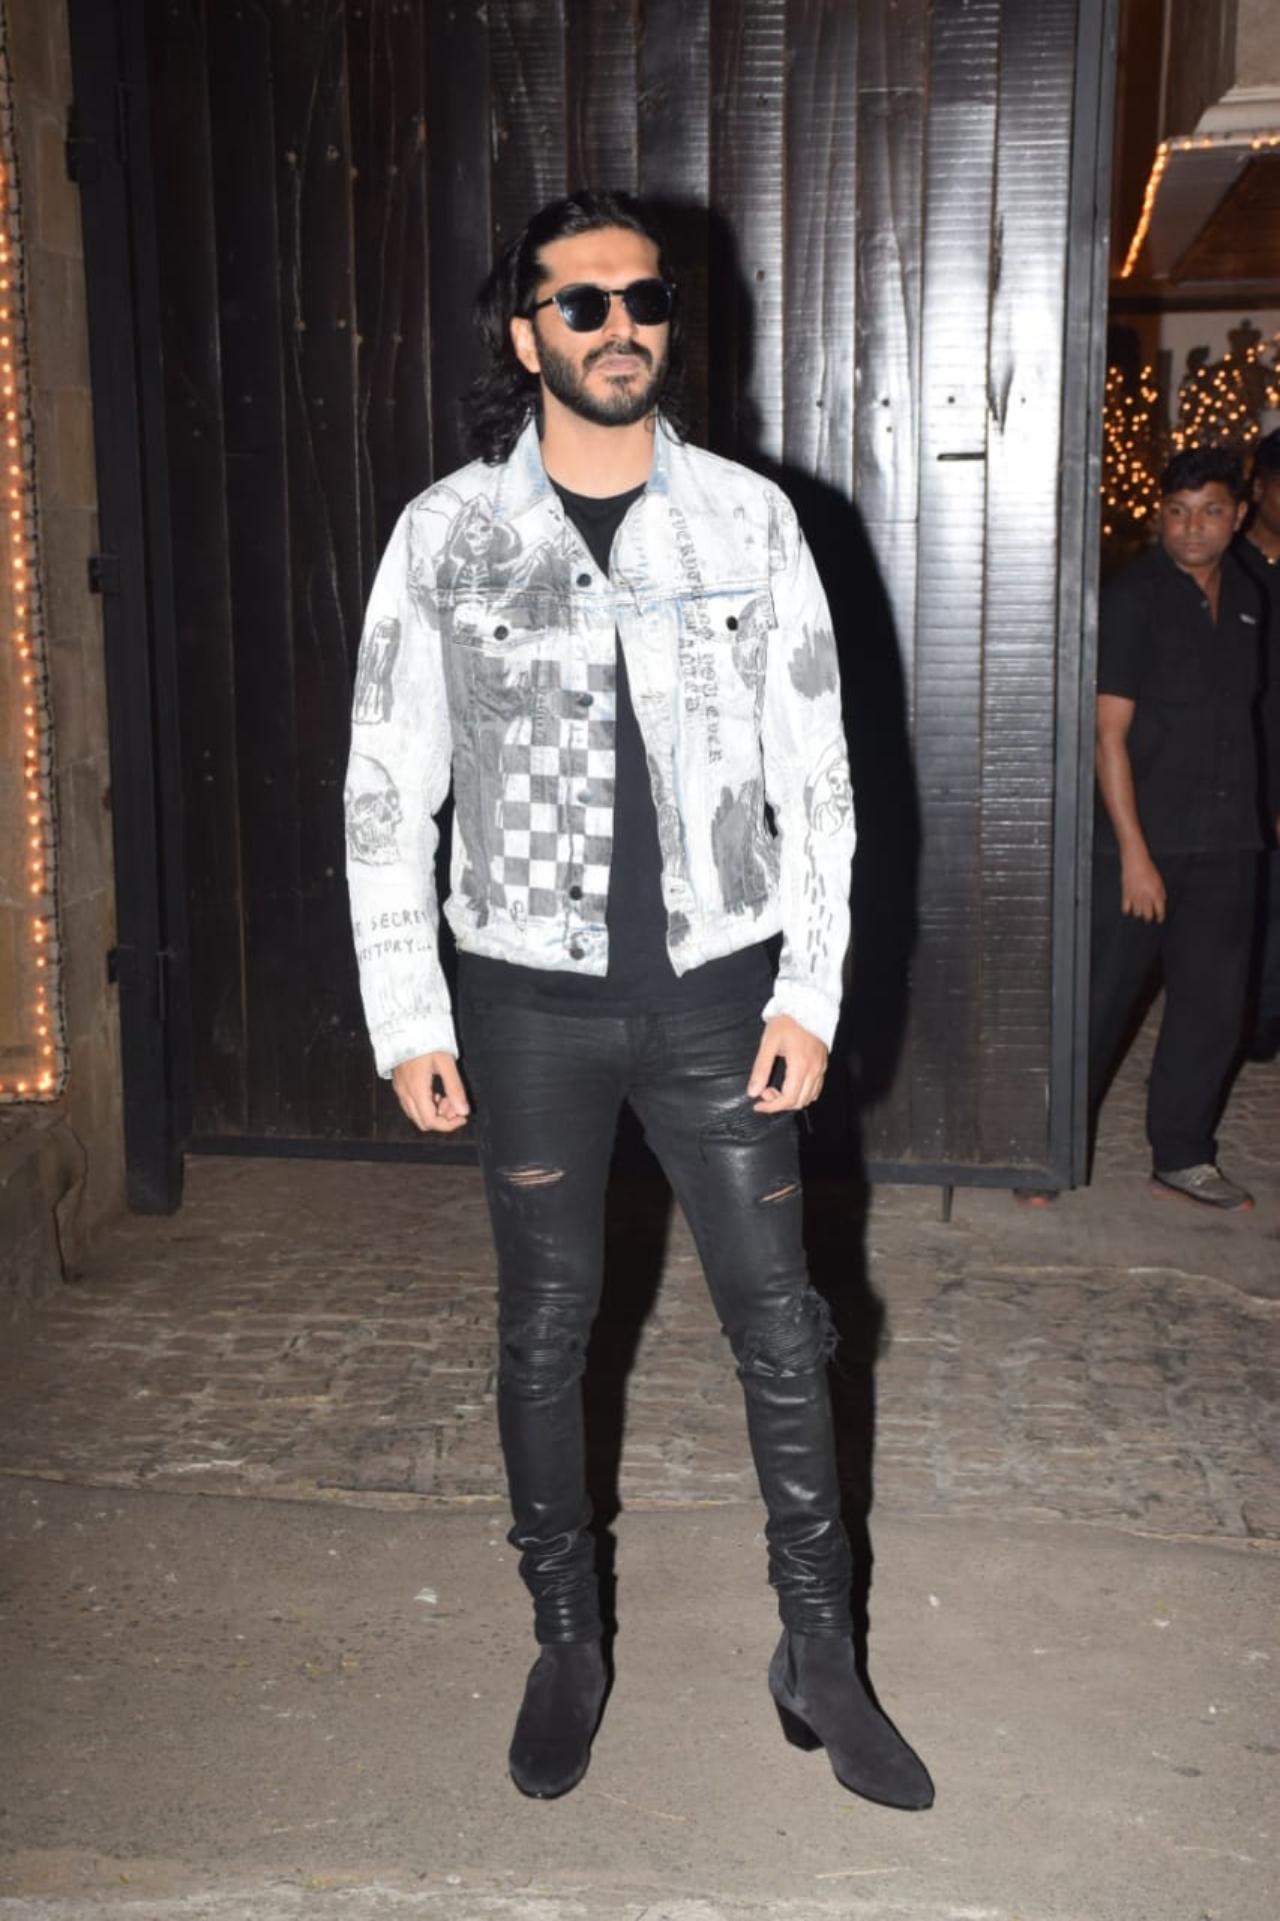 Anil Kapoor’s son Harshvardhan Kapoor opted for a denim jacket over a black t-shirt and matching jeans